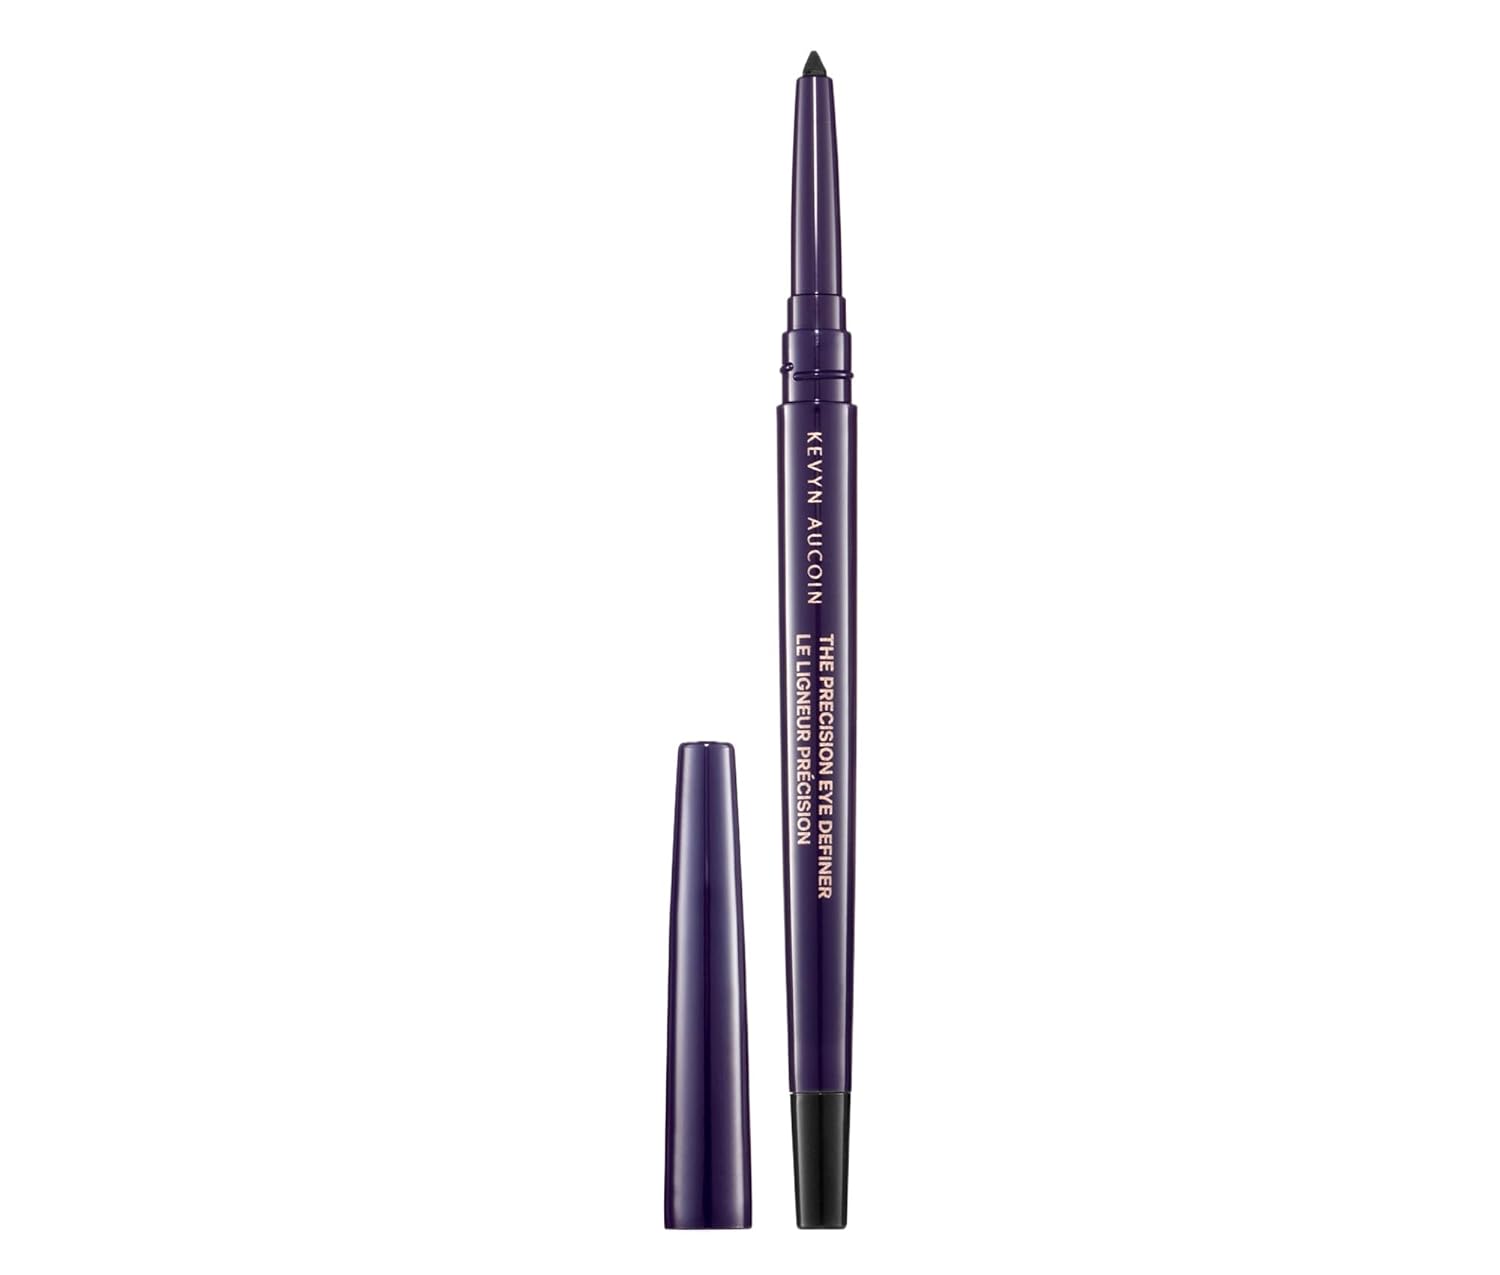 Kevyn Aucoin The Precision Eye Definer, Black (Vanta): Self-sharpening eyeliner. Easy precise pencil application. Pro makeup artist go to. Define eyes for long-wearing, sharp and smooth lines